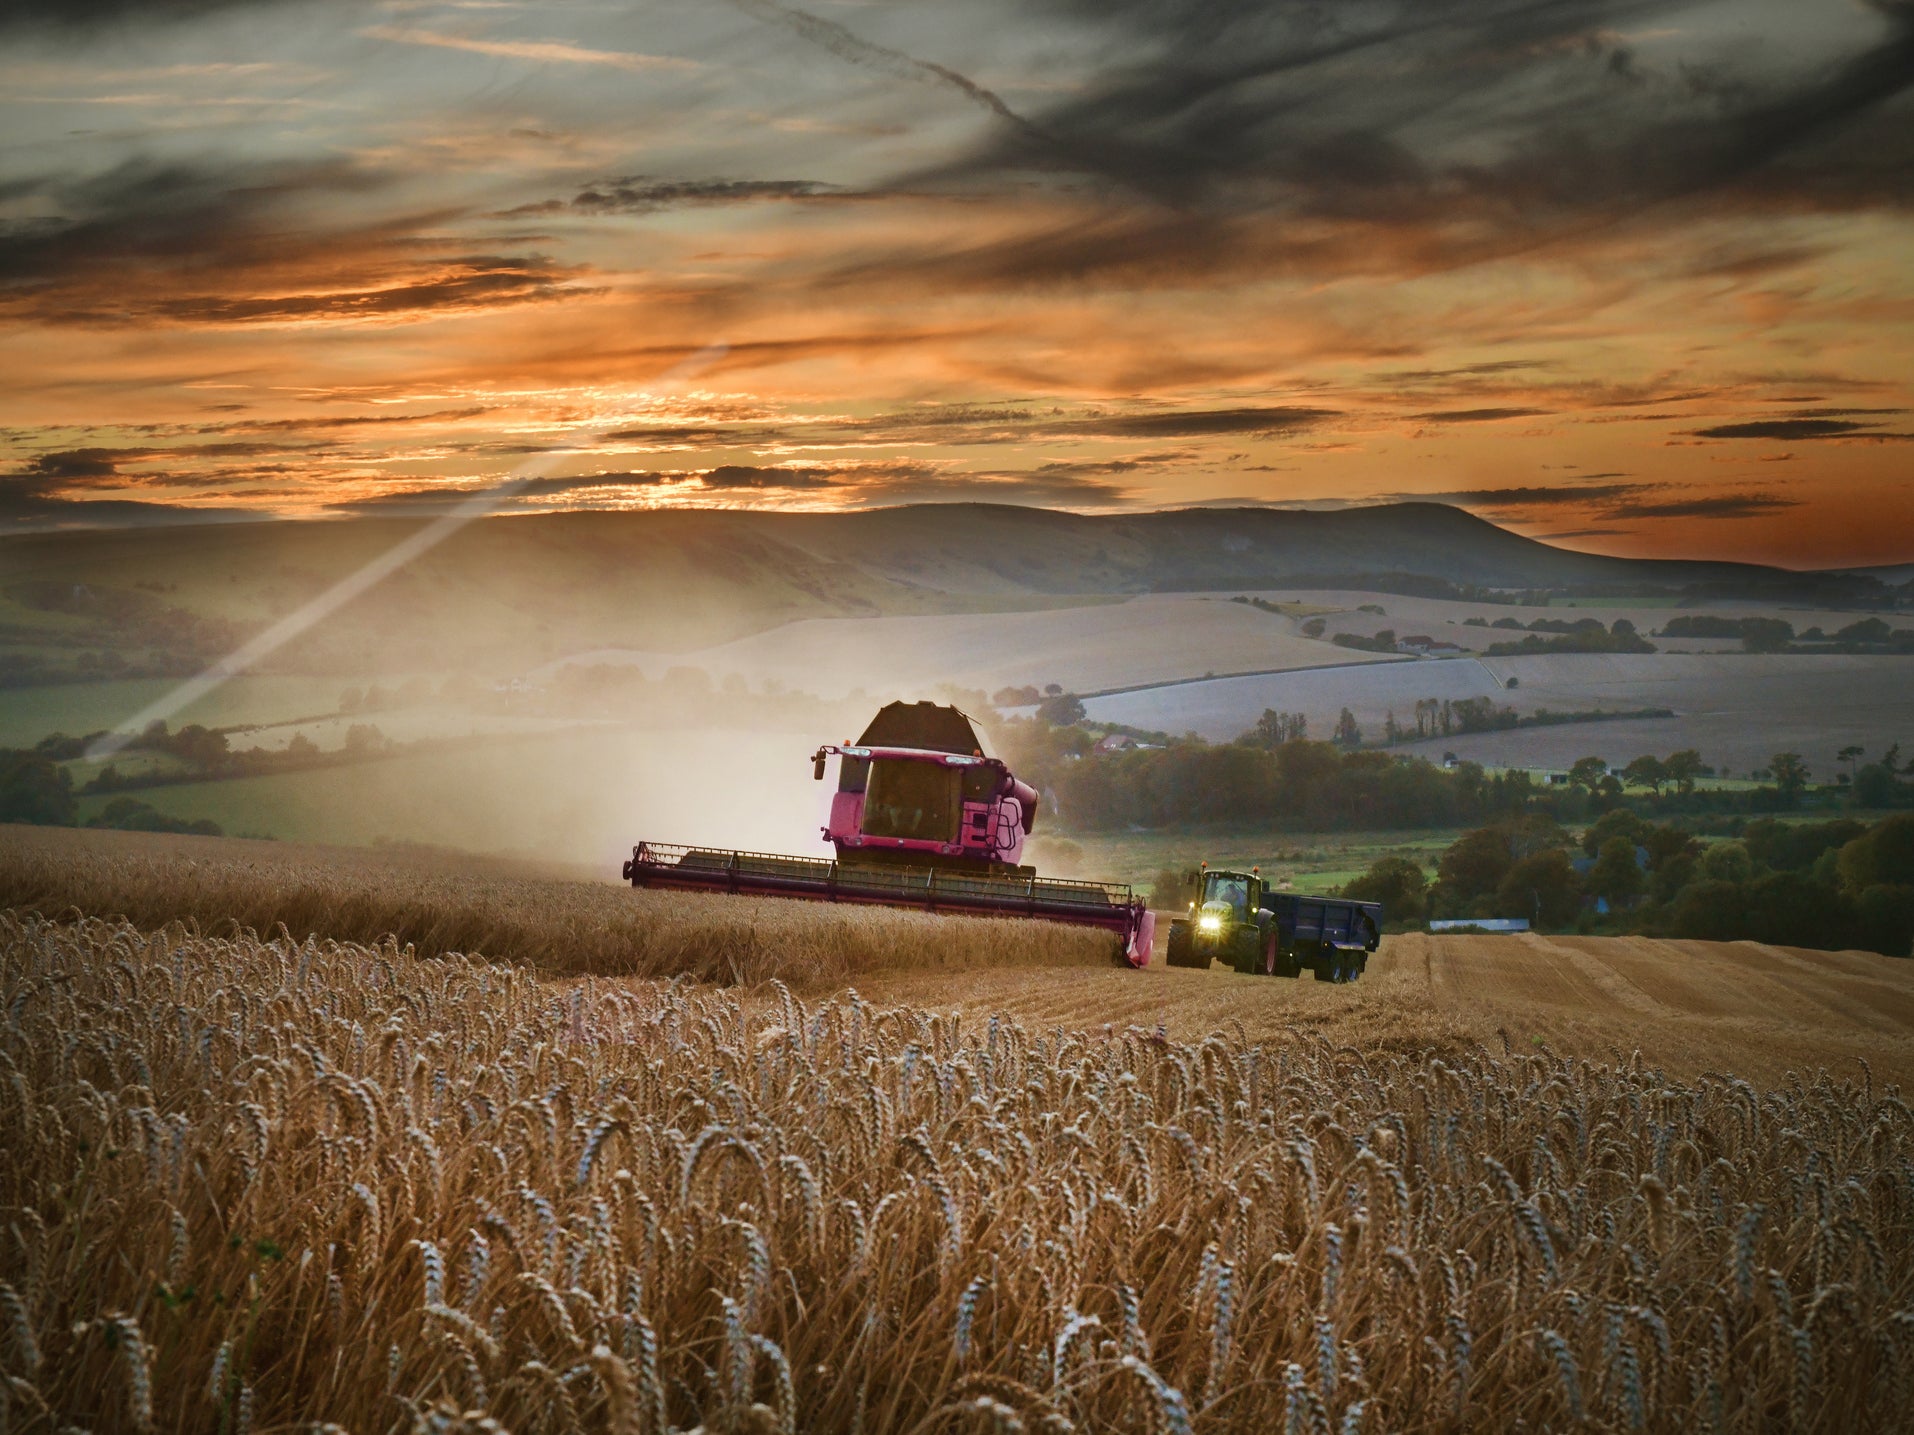 Wheat yields for 2020 are expected to be down by a third, the NFU has said